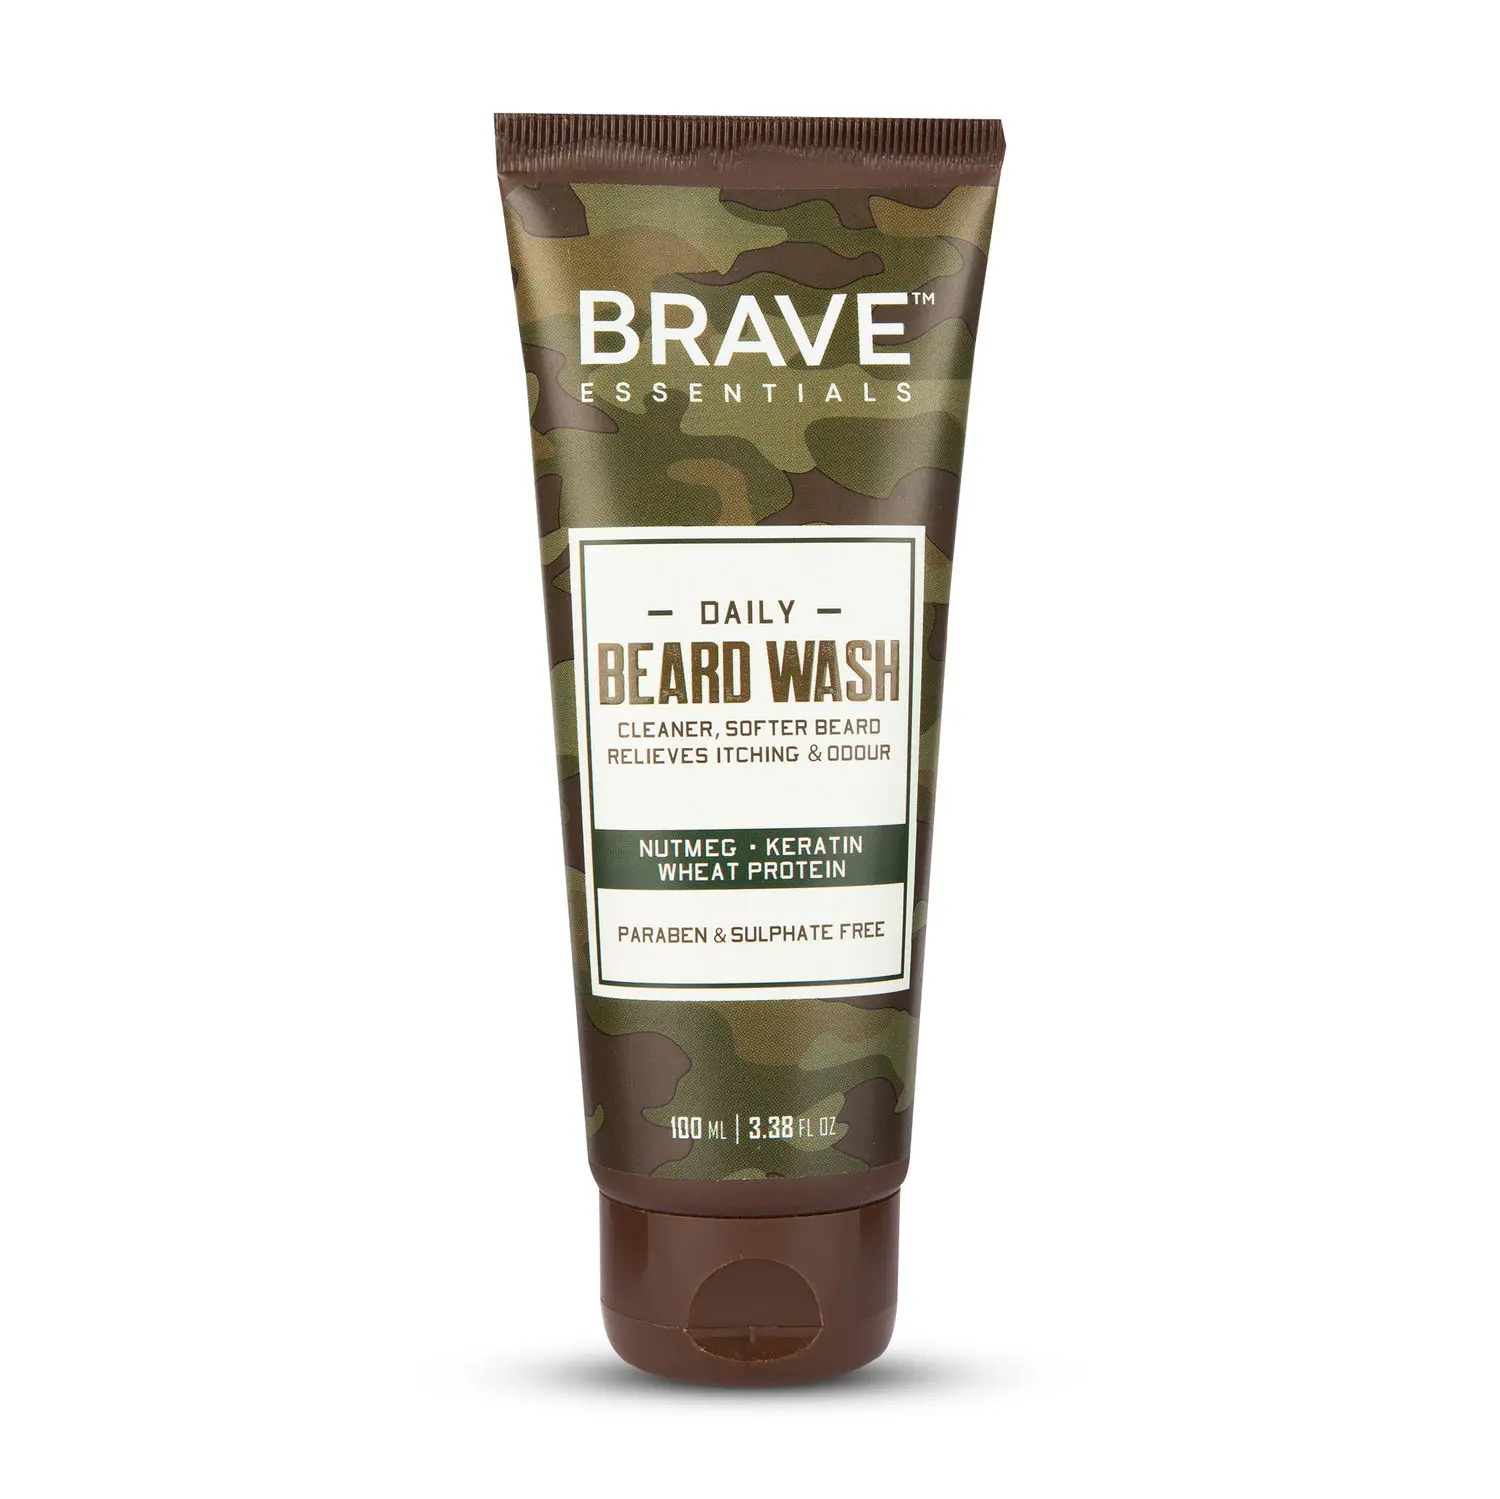 Brave Essentials Daily Beard Wash | 100 ml | Cleaner, Softer Beard; Relieves Itching and Odour